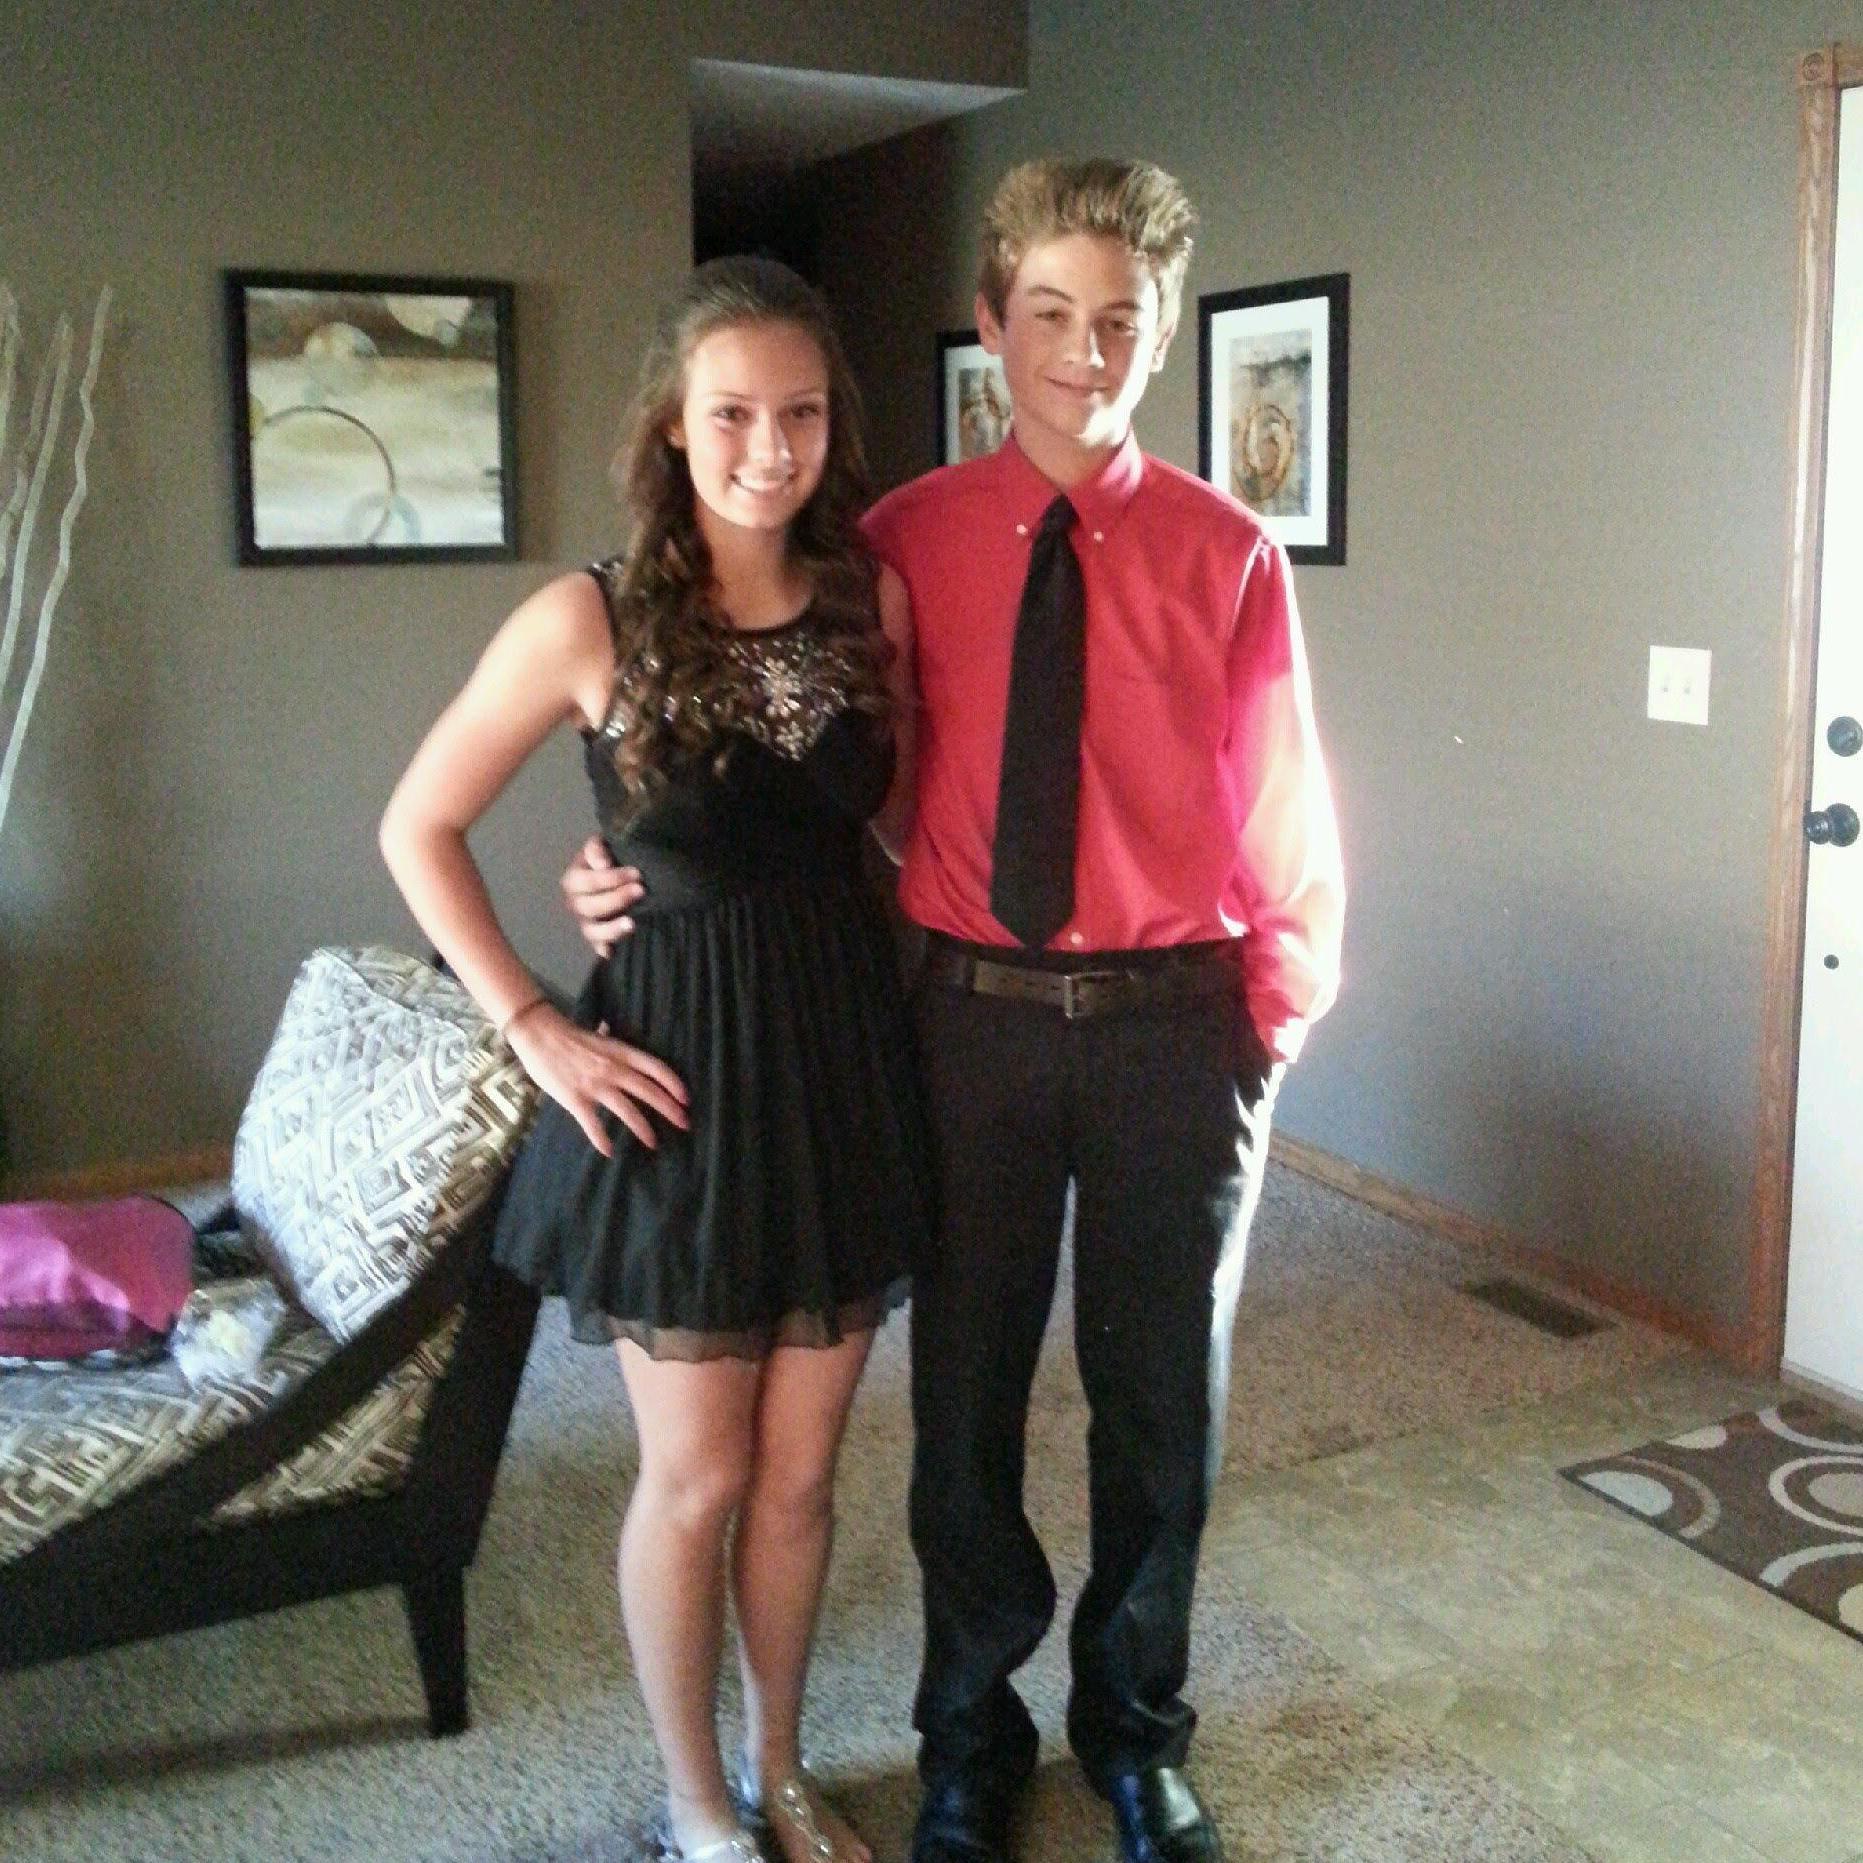 Our first homecoming together! Very awkward